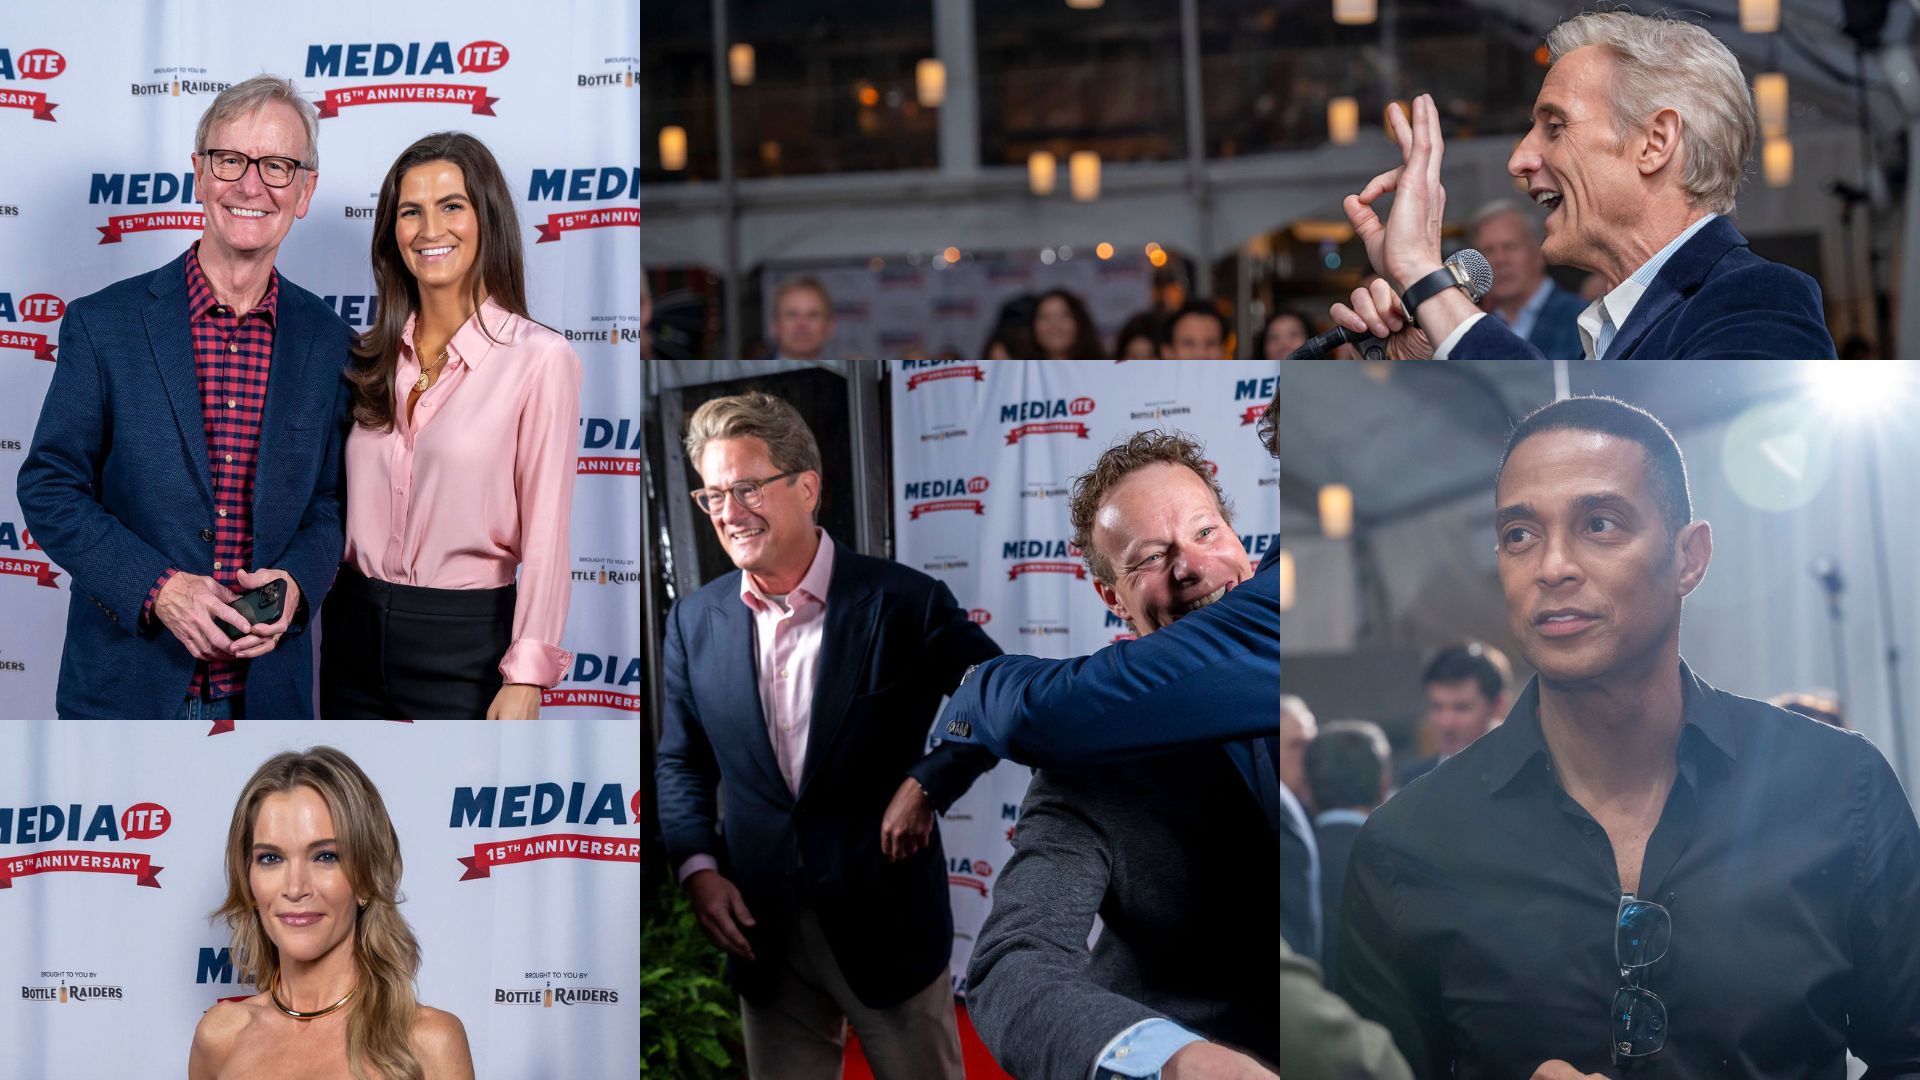 Mediaite Celebrates 15 Years With a Star-Studded NYC Bash